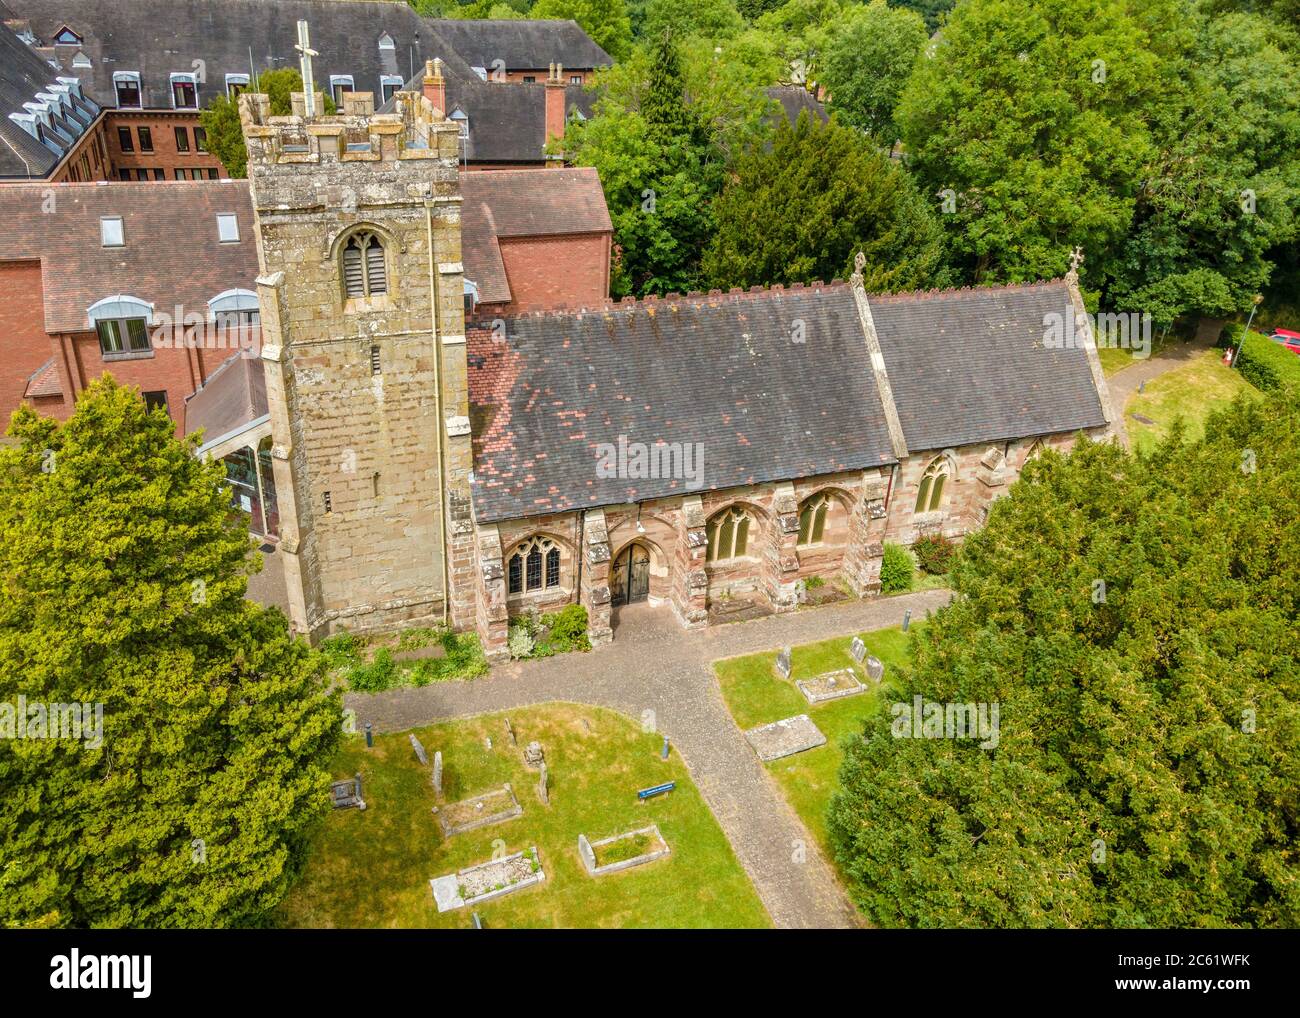 Aerial view of St. Peters Church, Ipsley, Redditch, Worcestershire, England. Stock Photo